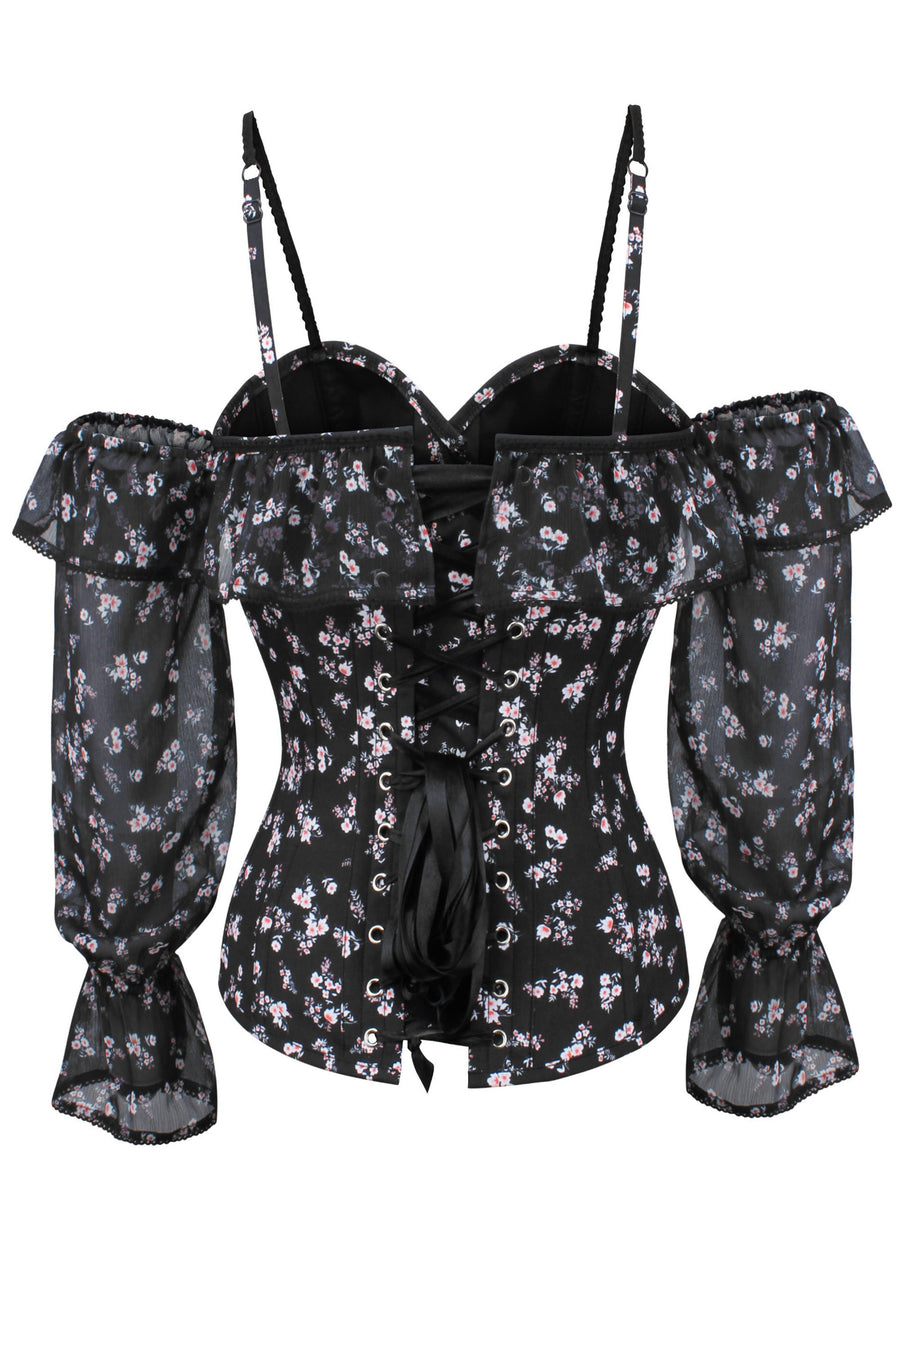 Long Sleeve Dark Ditsy Floral Corset Top with Cold Shoulder